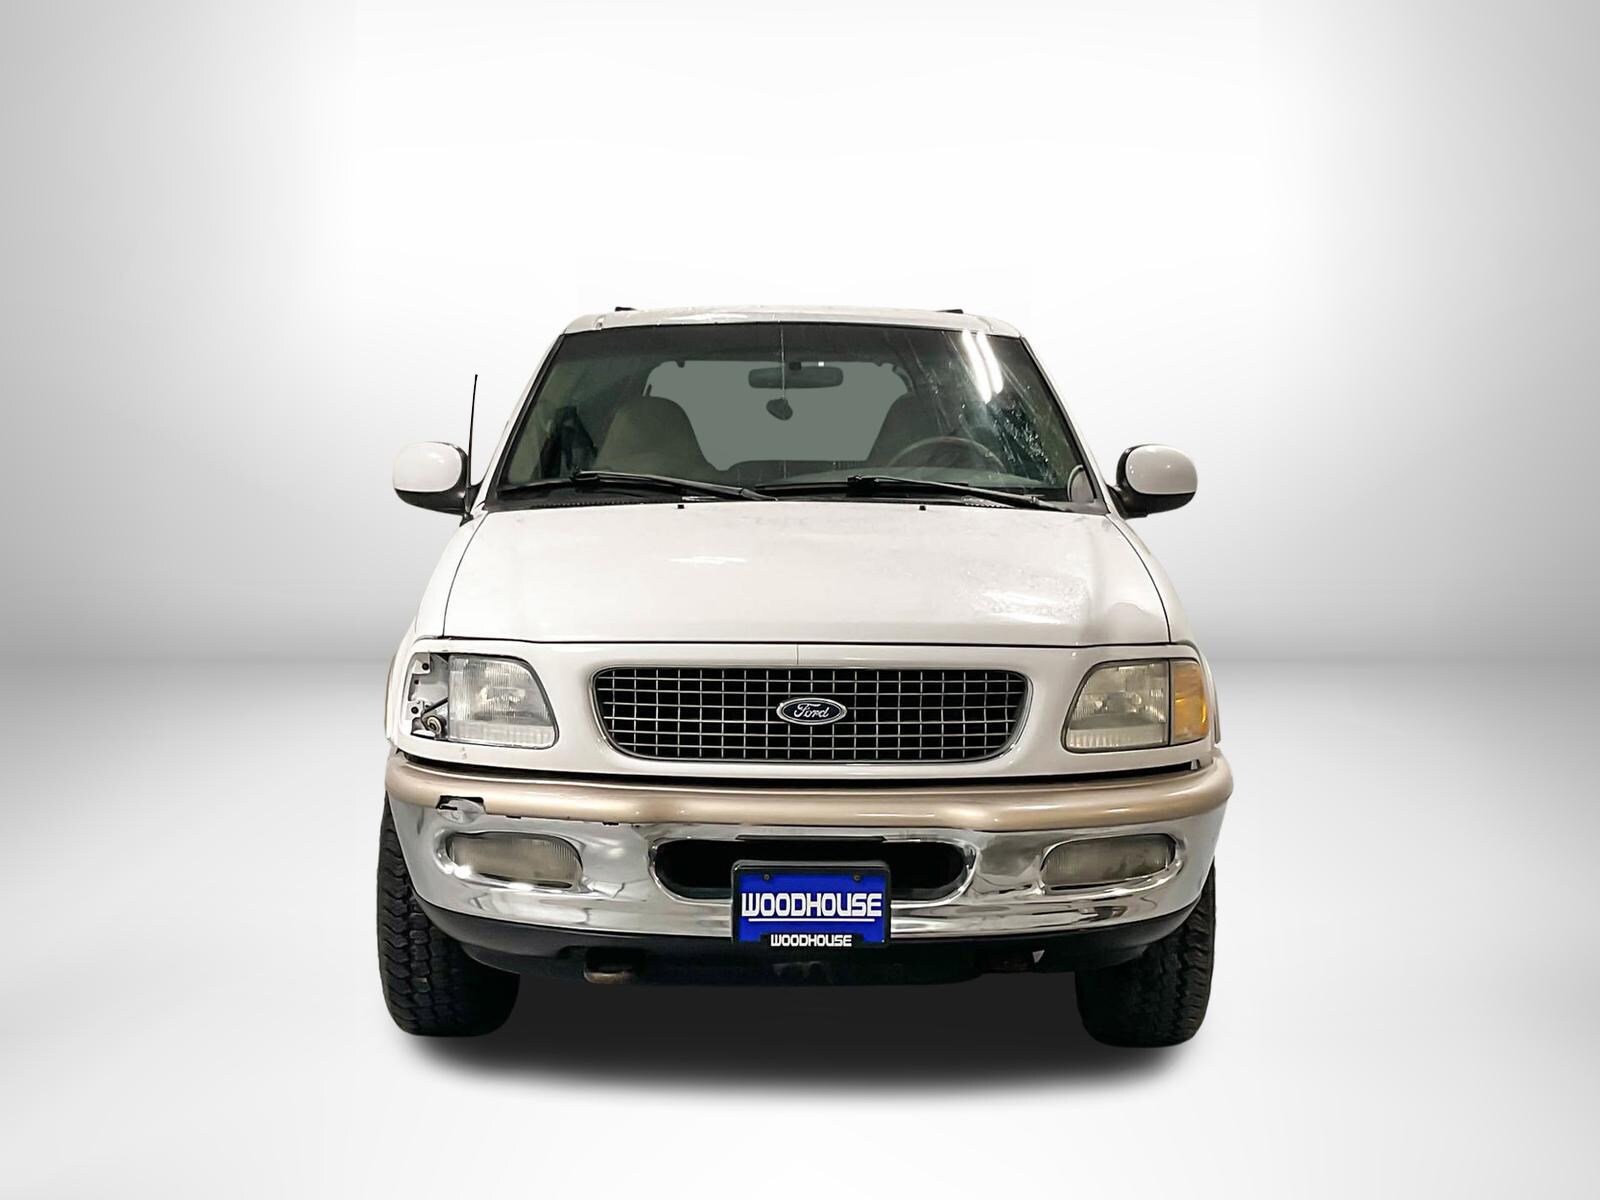 Used 1998 Ford Expedition XLT with VIN 1FMPU18L8WLA55340 for sale in Omaha, NE